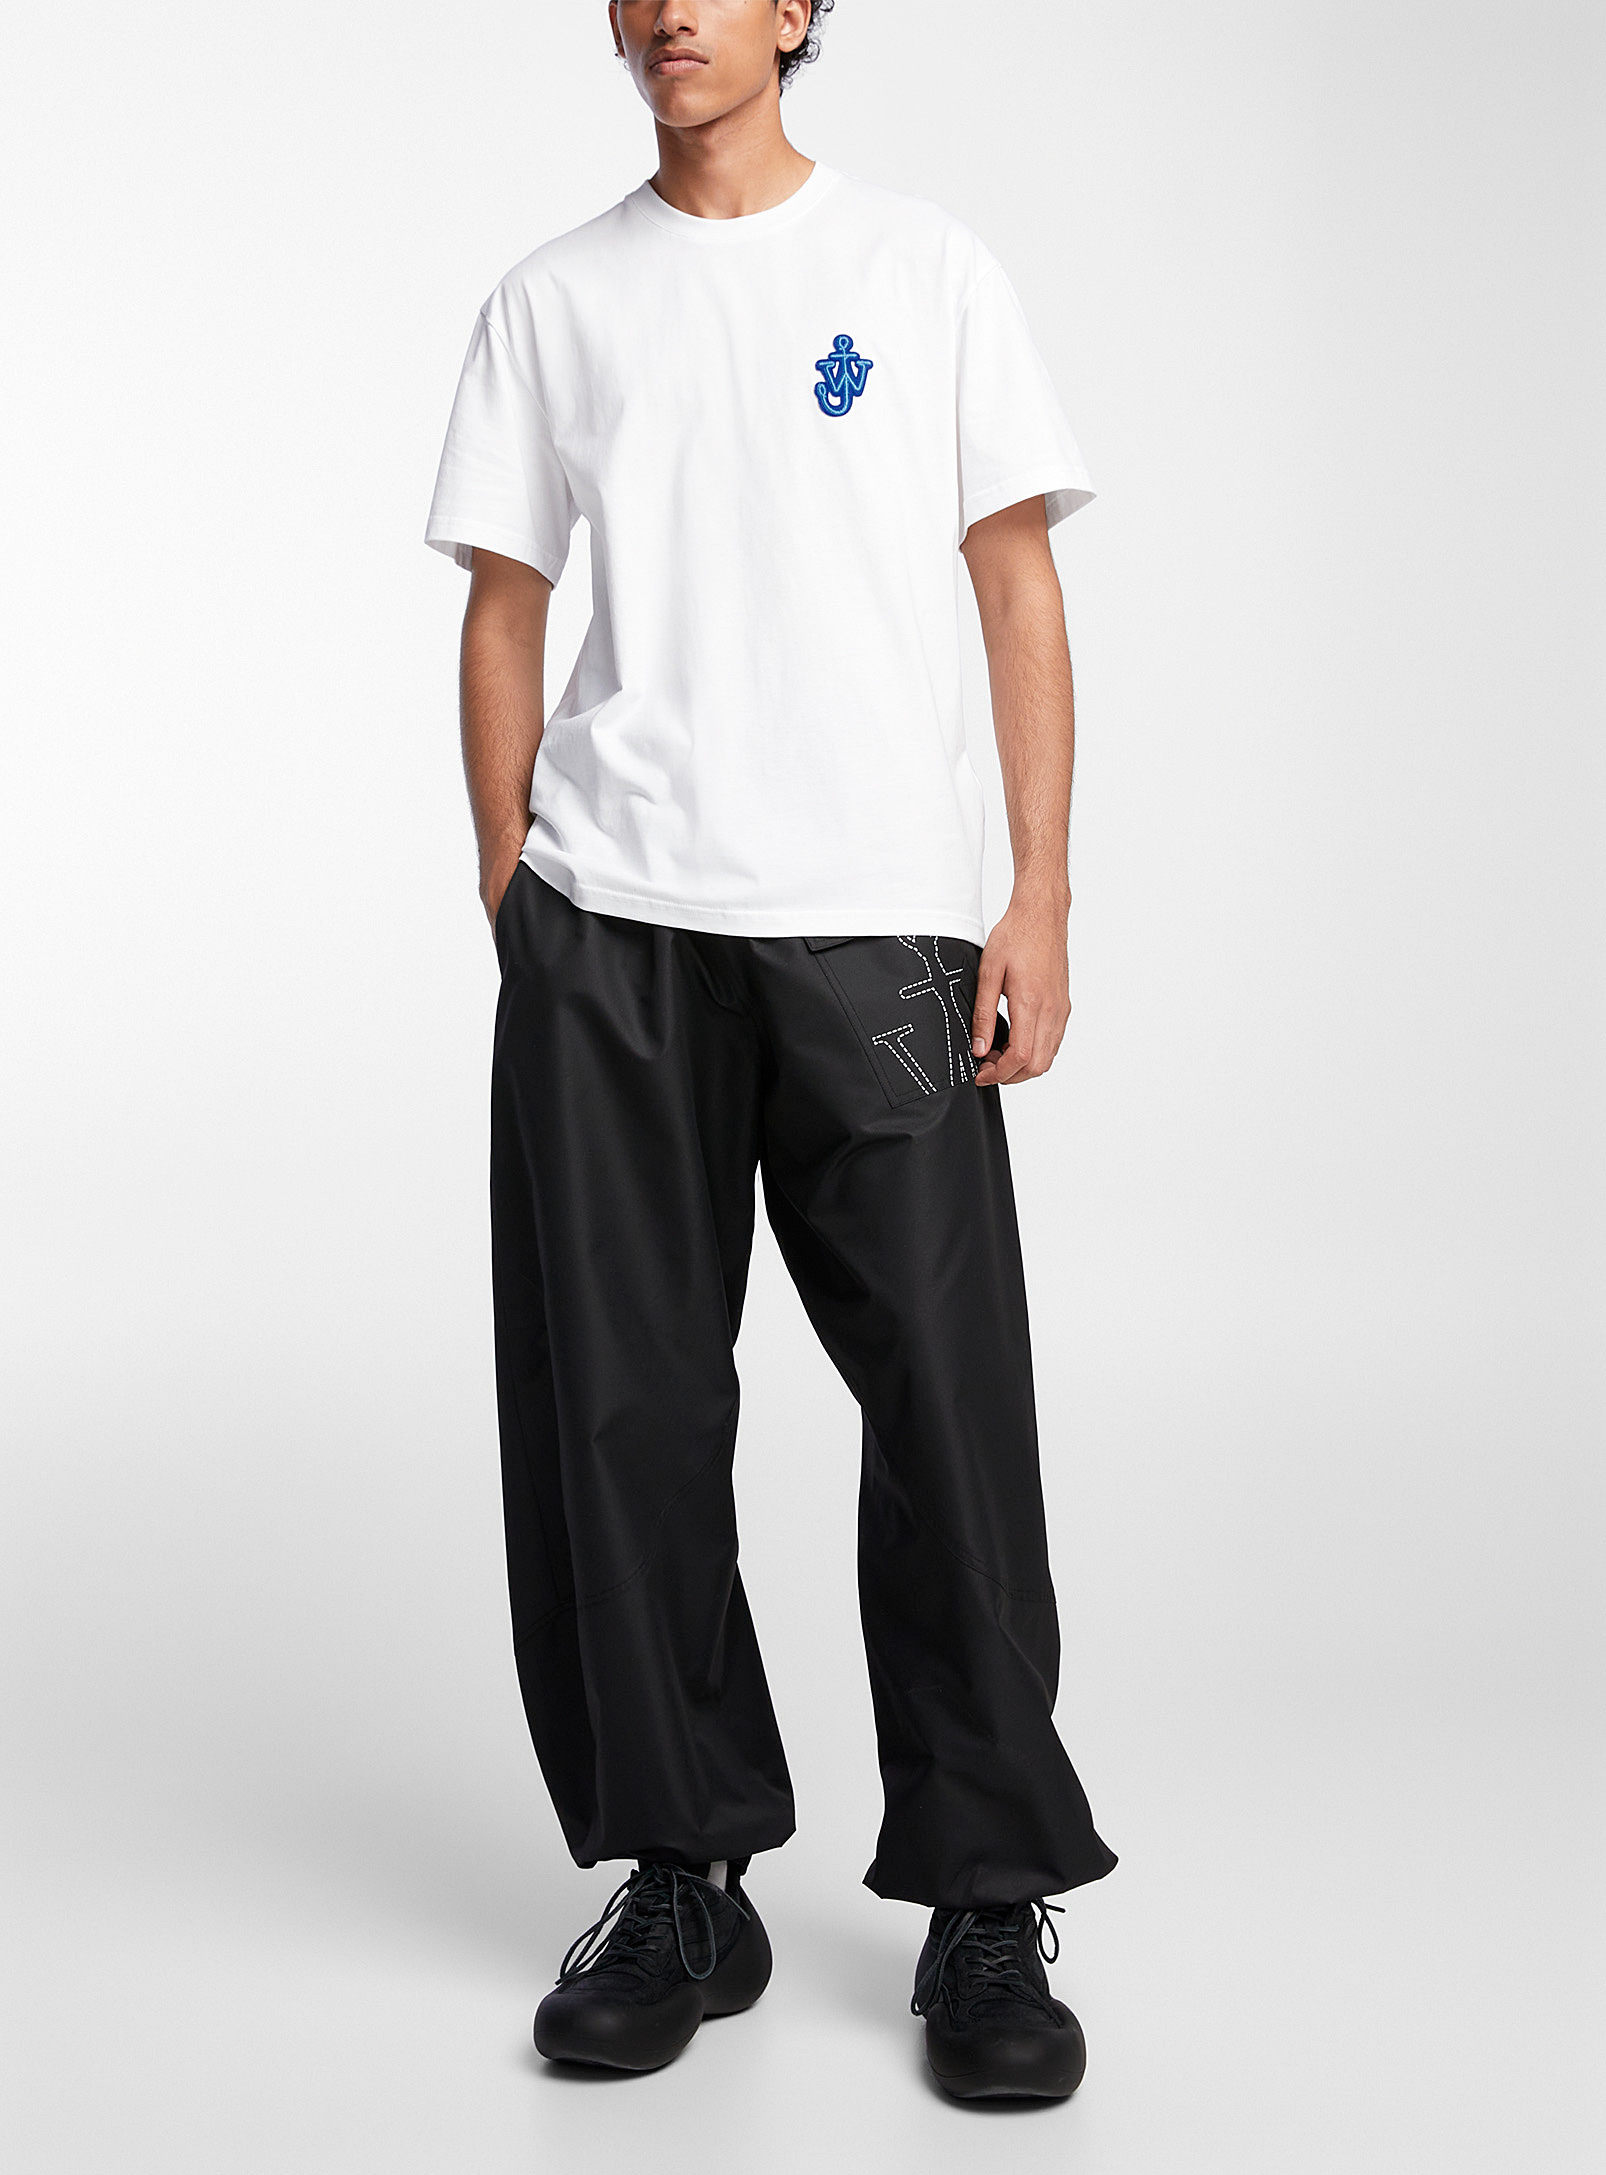 JW Anderson - Men's Anchor puff jogger